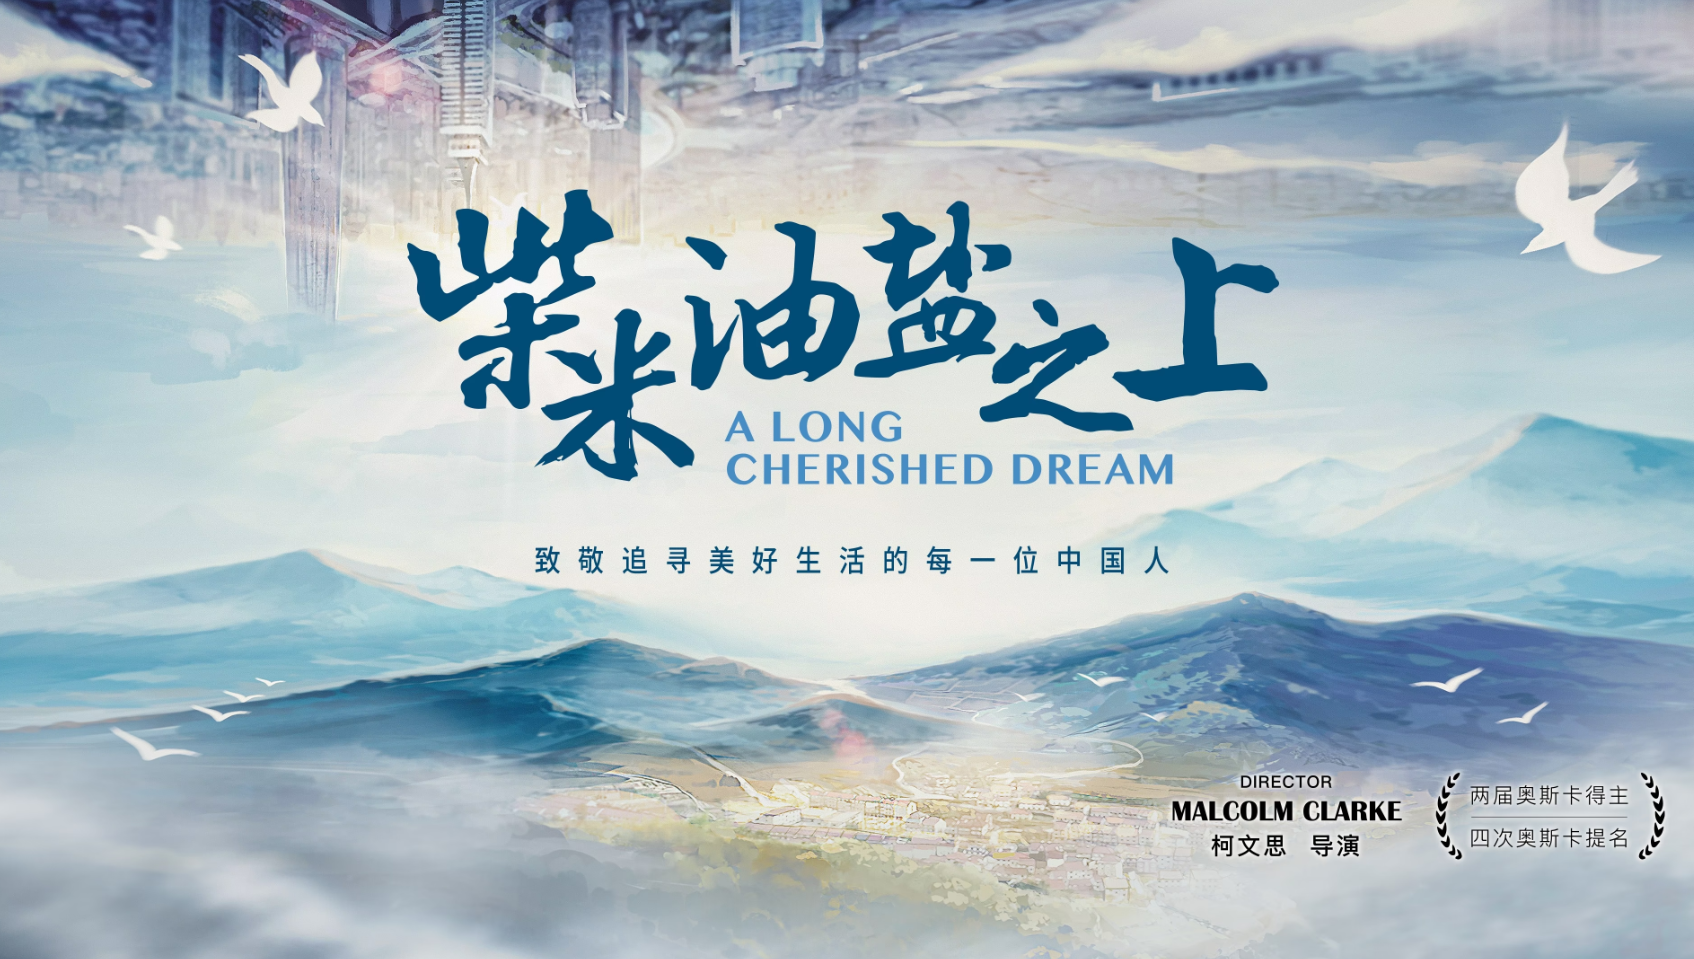 My cherished Dream is.... A long dream